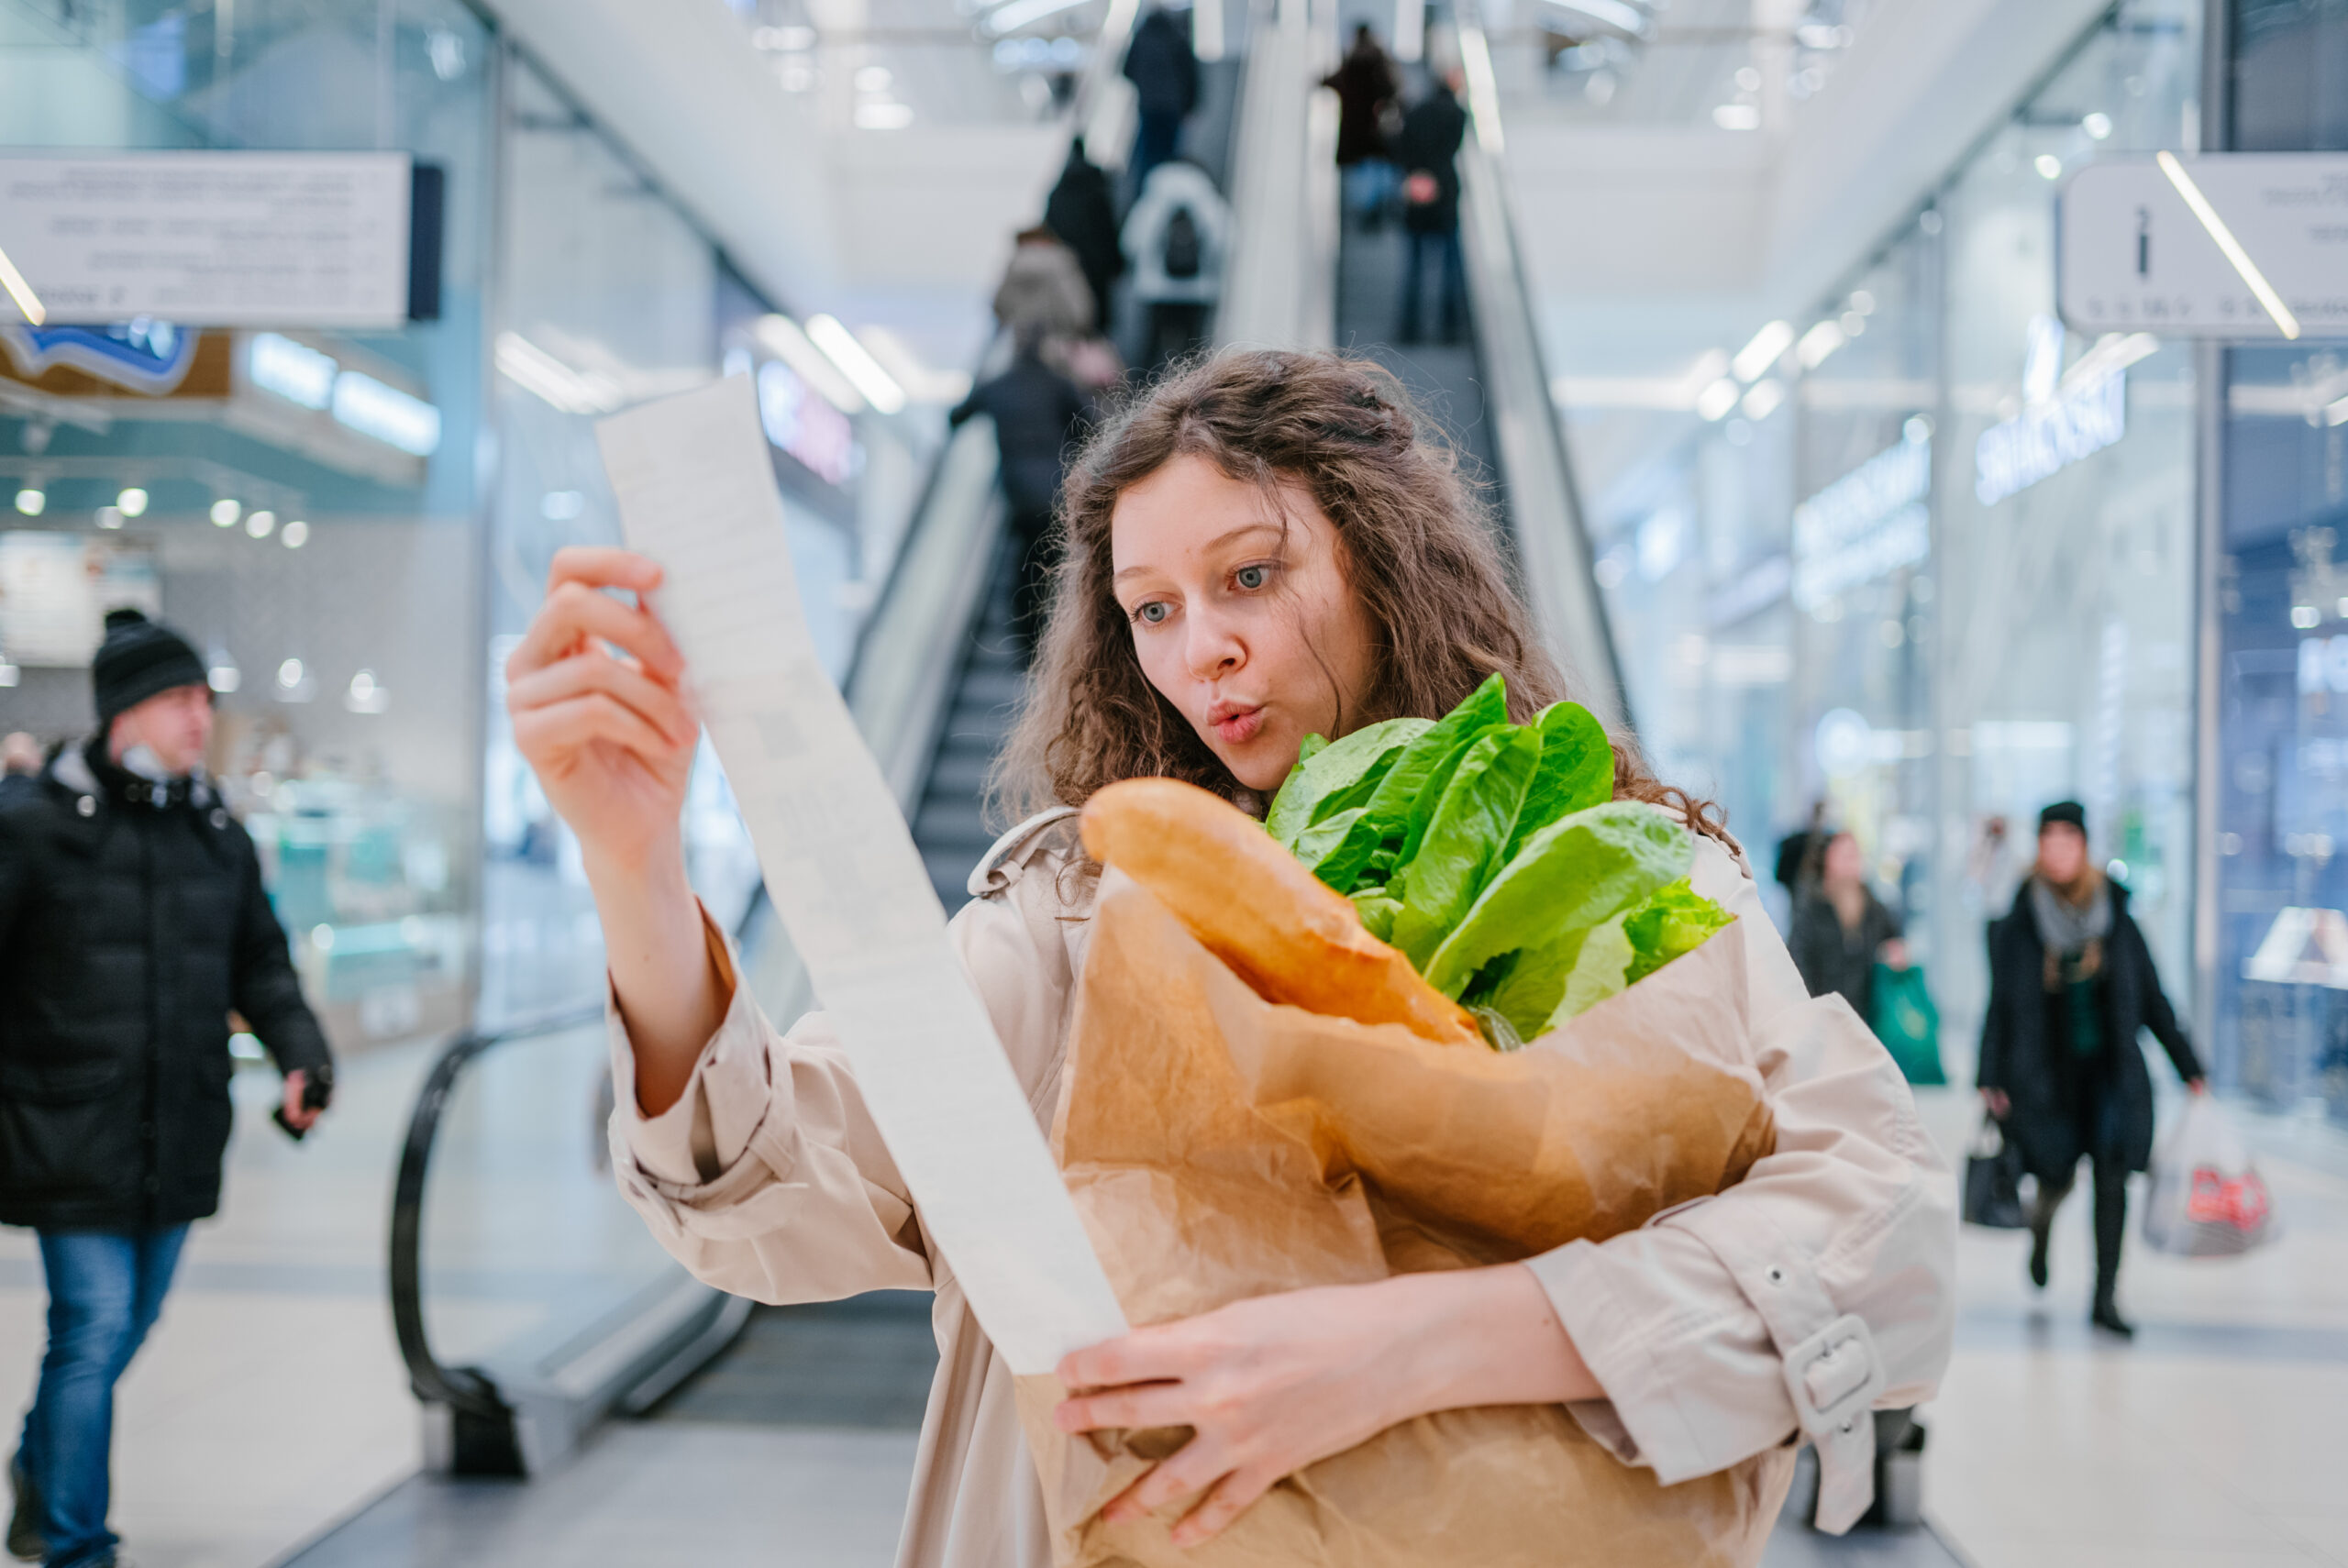 Rising food prices in part due to inflation. Surprised woman looking into a paper check at the mall, holding a paper bag with fresh herbs and a baguette.